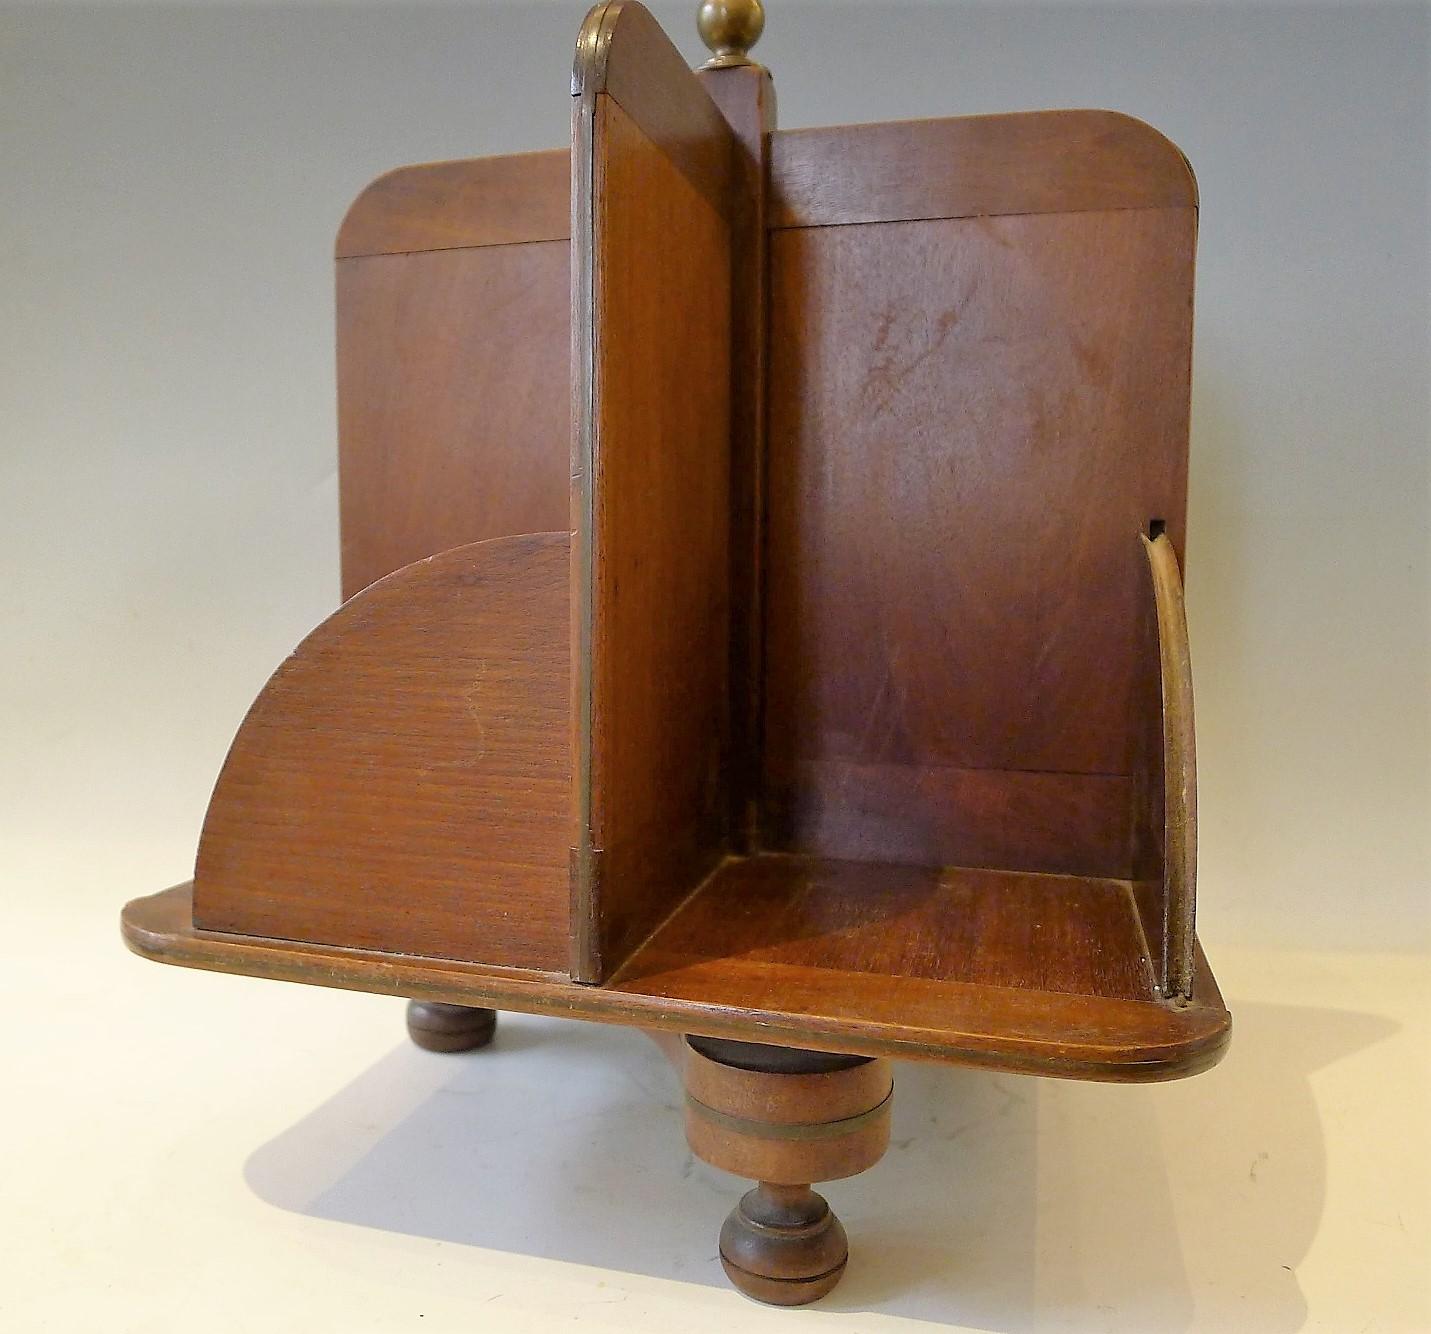 Unusual bookcase for a desk, a table even a bookshelf

Thin mahogany panel and rounded tripod with decorative brass

  